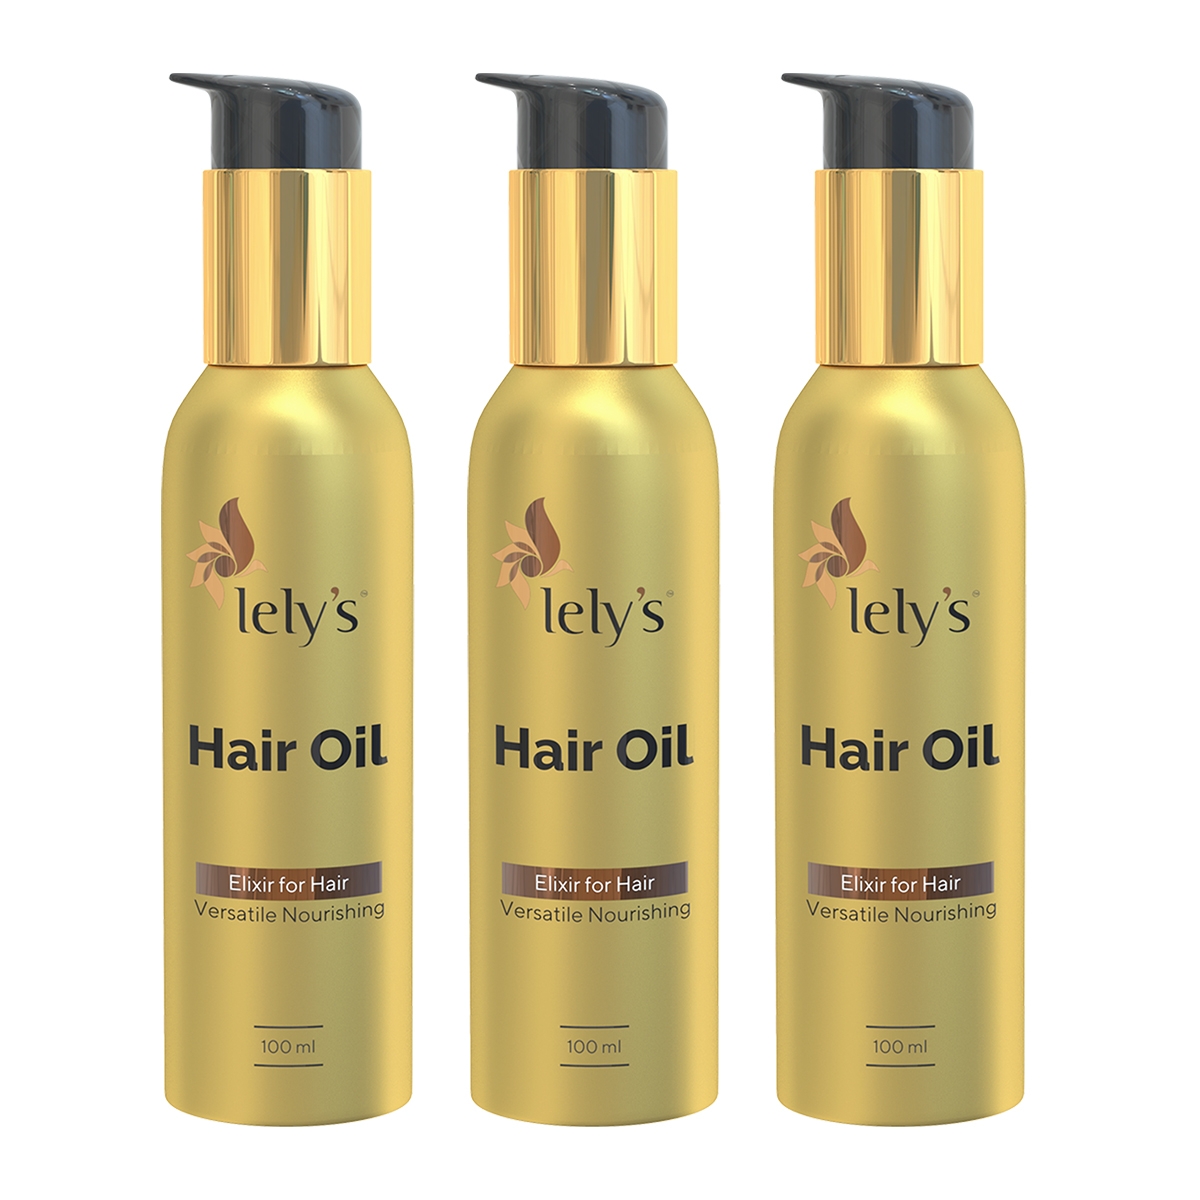 lely's | Lely’s Hair Oil For Hair Growth - Transforms Dry-Brittle Hair Into Silky, Reduces Hair Fall, Shiny And Smooth Hair, Soft And Firm Hair, Repairs Split Ends, Control Hair Damage - 100 Ml Pack of 3